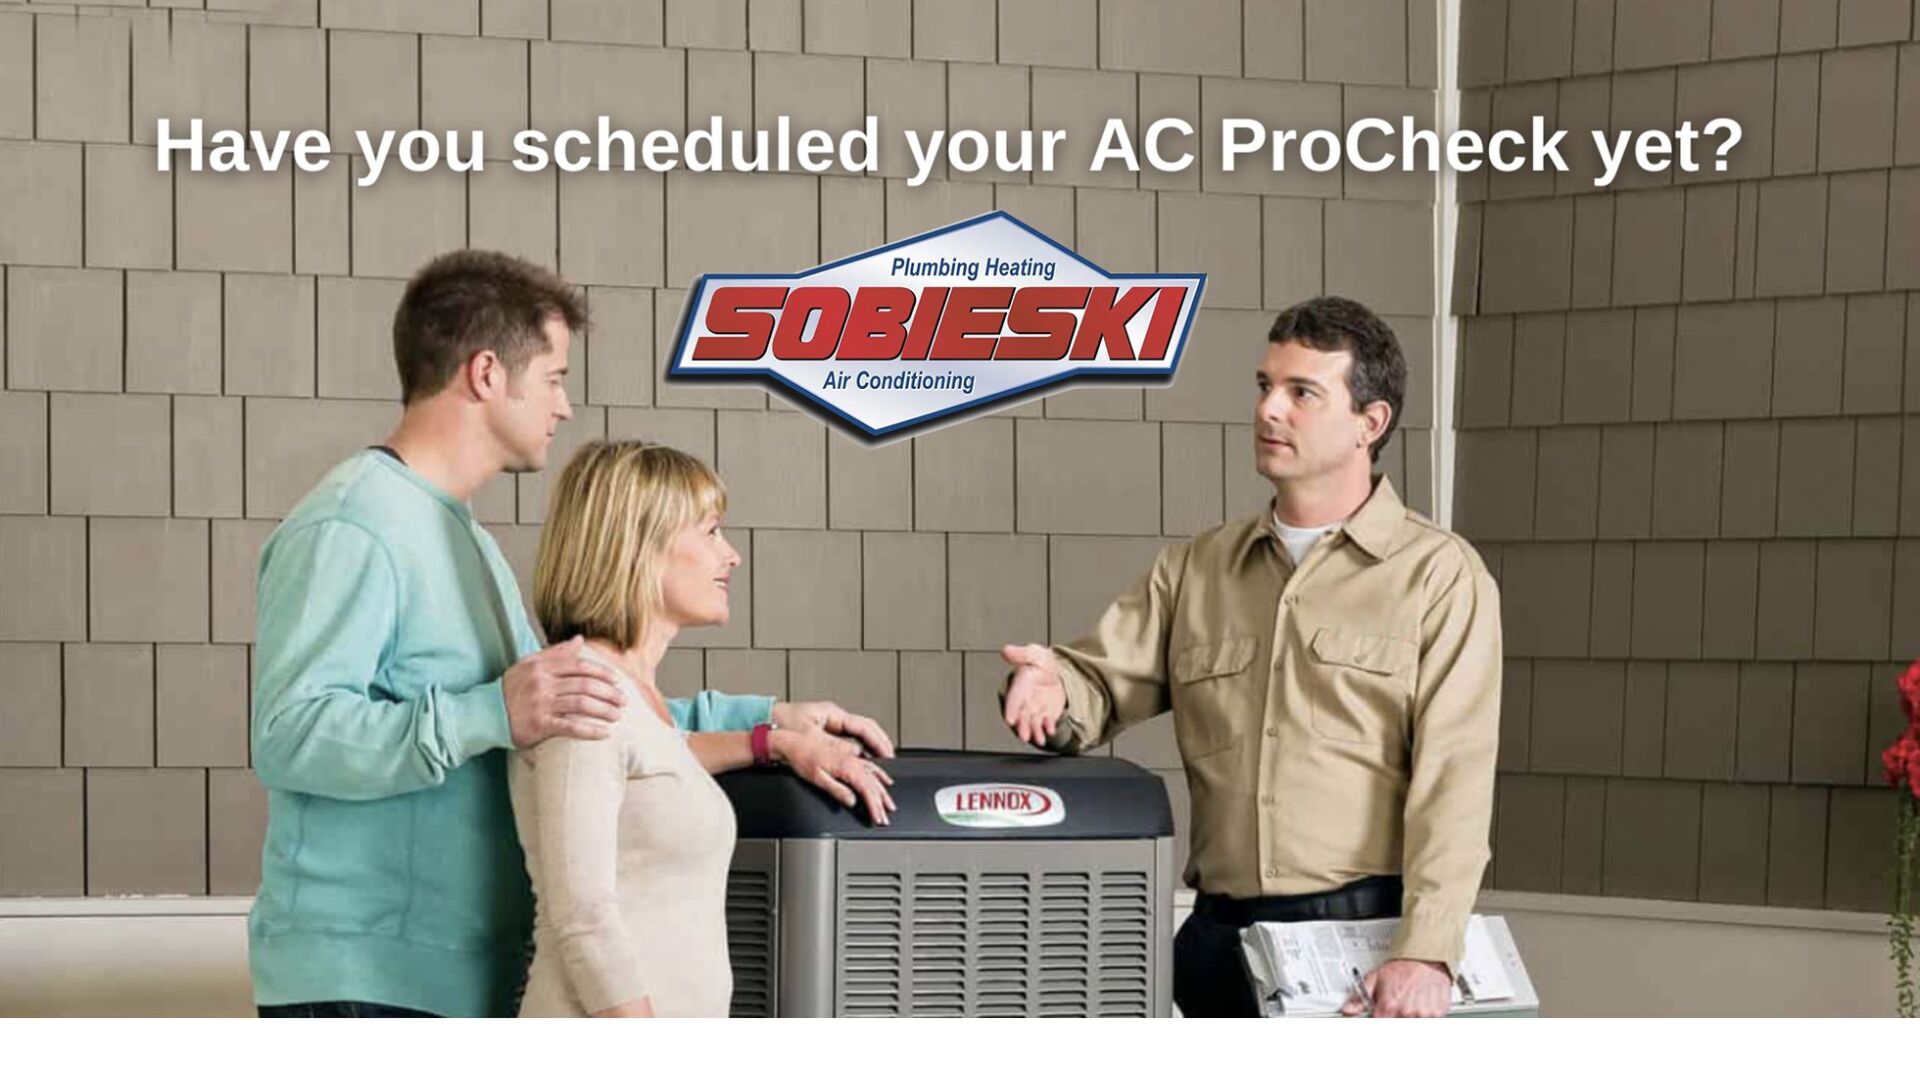 Have you scheduled your AC ProCheck yet?